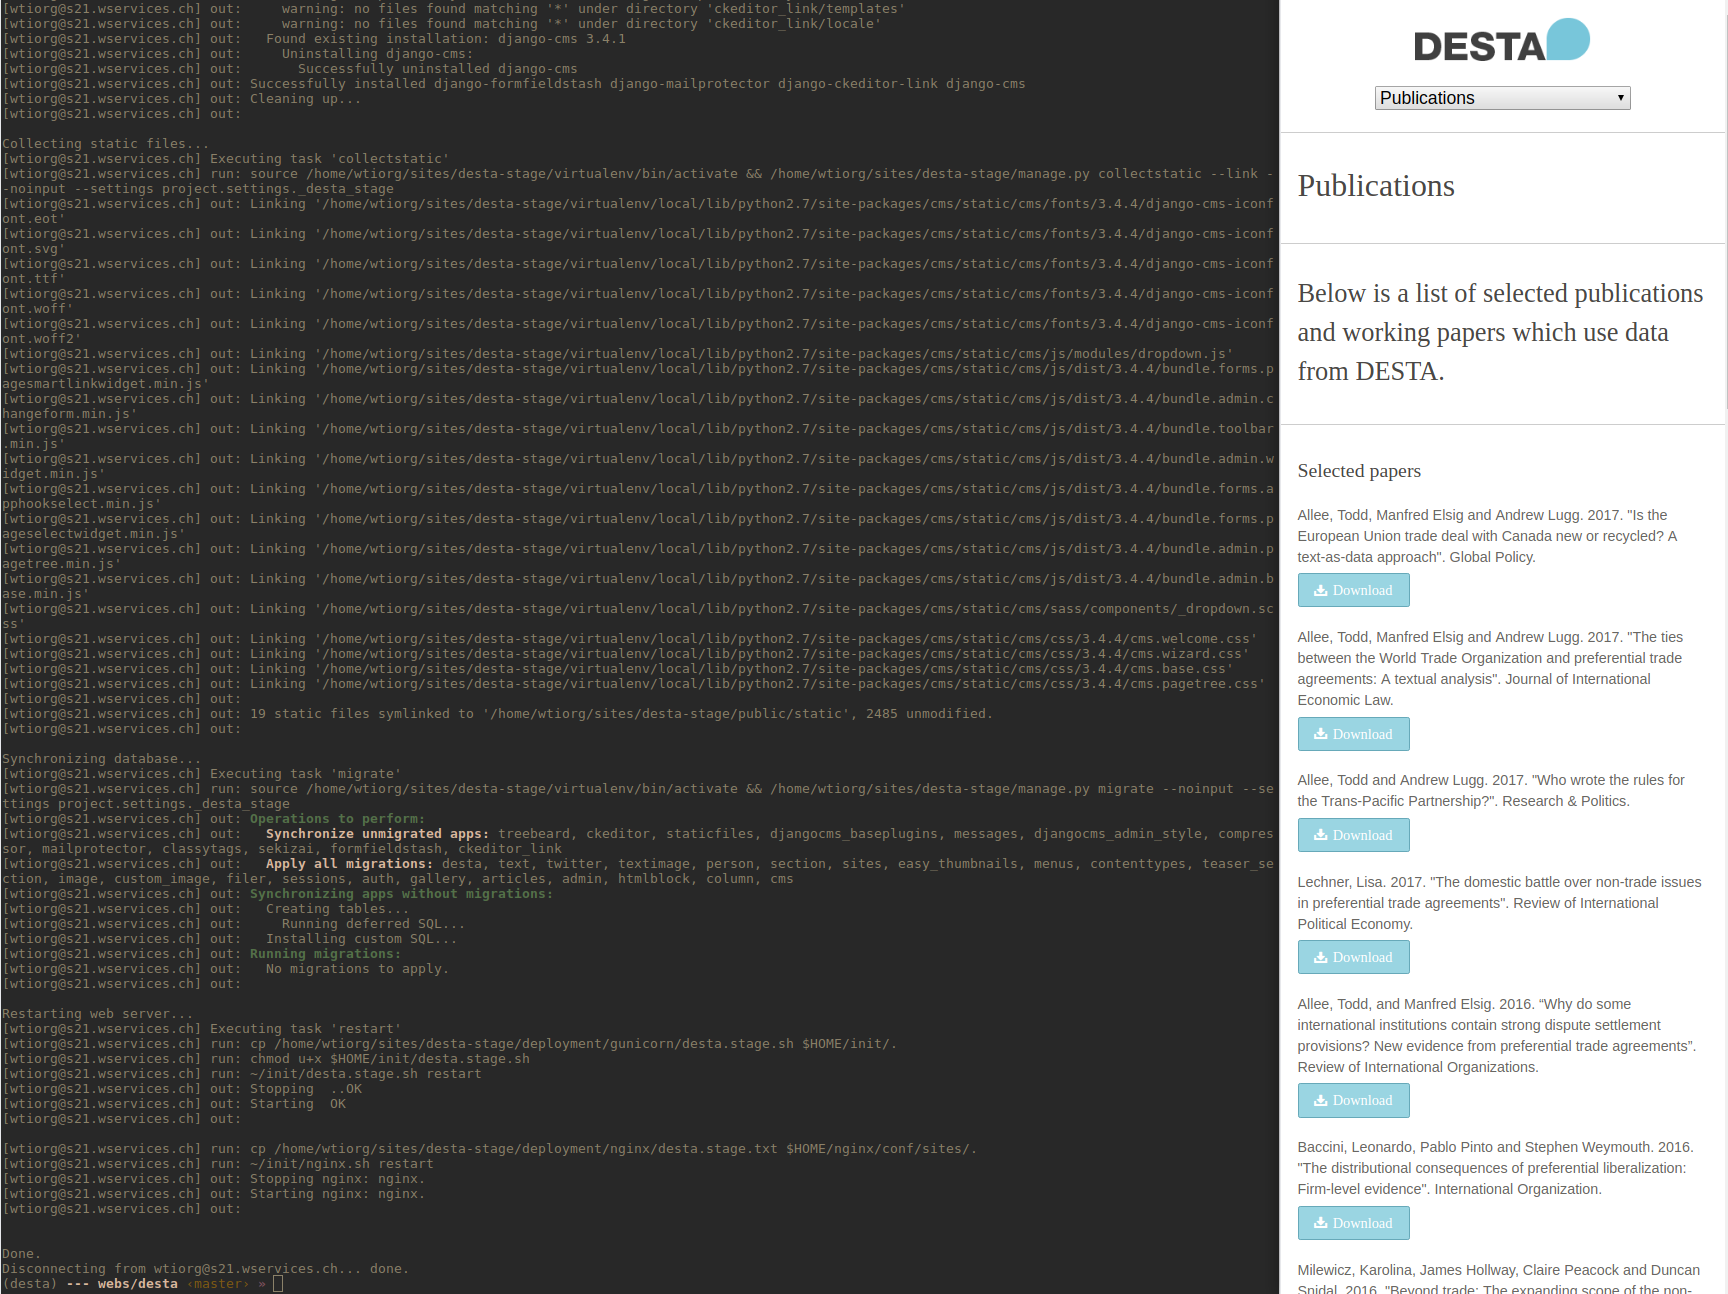 Deploy it like fabric, mobile view / Design of Trade Agreements (DESTA) Database